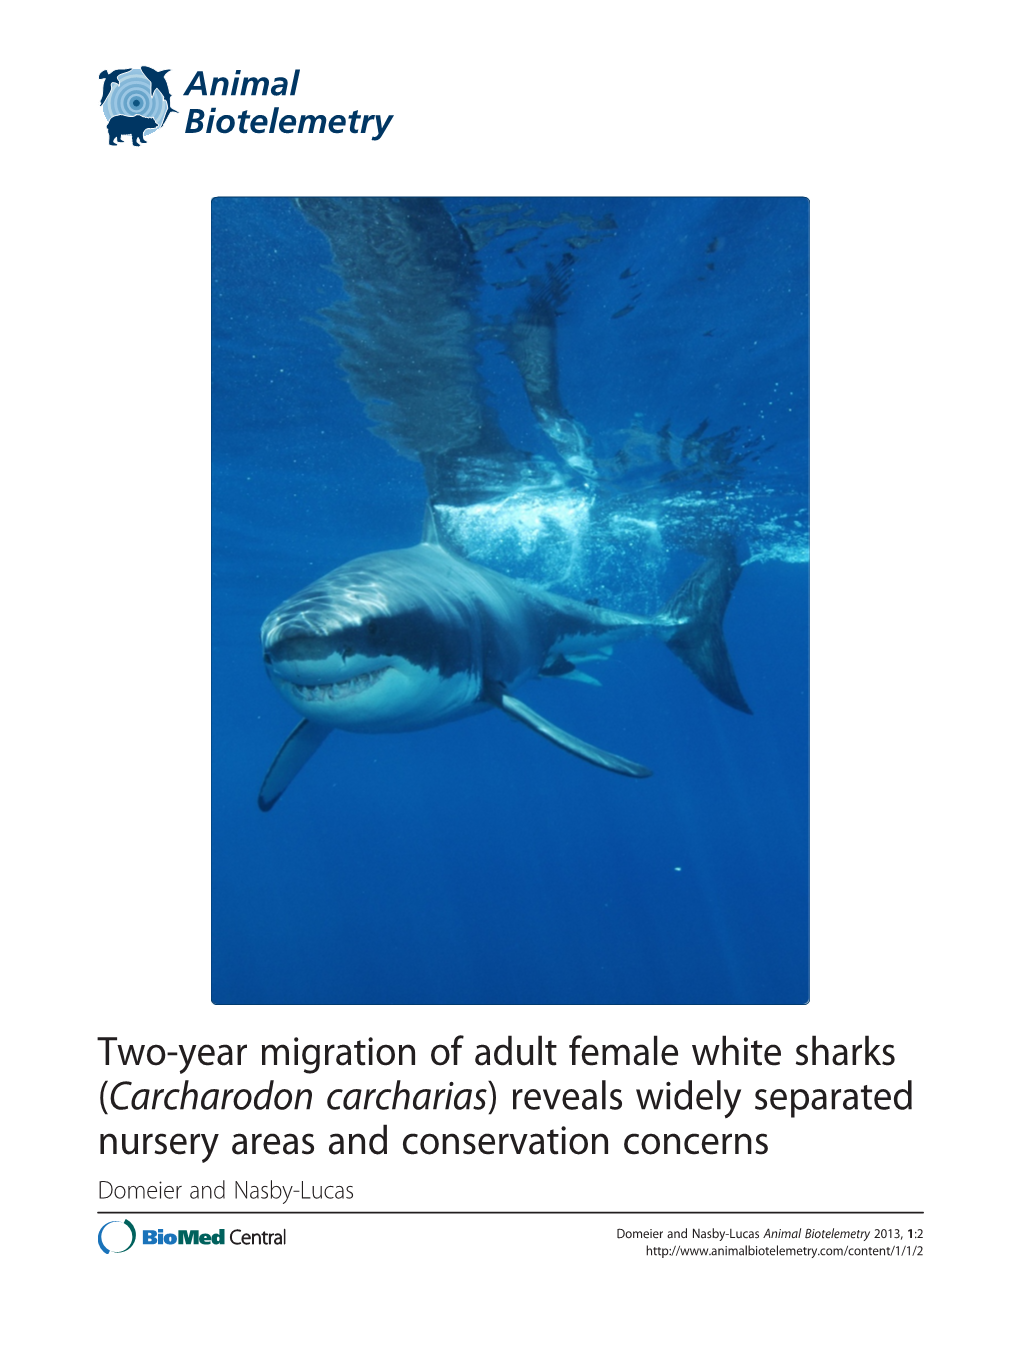 Two-Year Migration of Adult Female White Sharks (Carcharodon Carcharias) Reveals Widely Separated Nursery Areas and Conservation Concerns Domeier and Nasby-Lucas